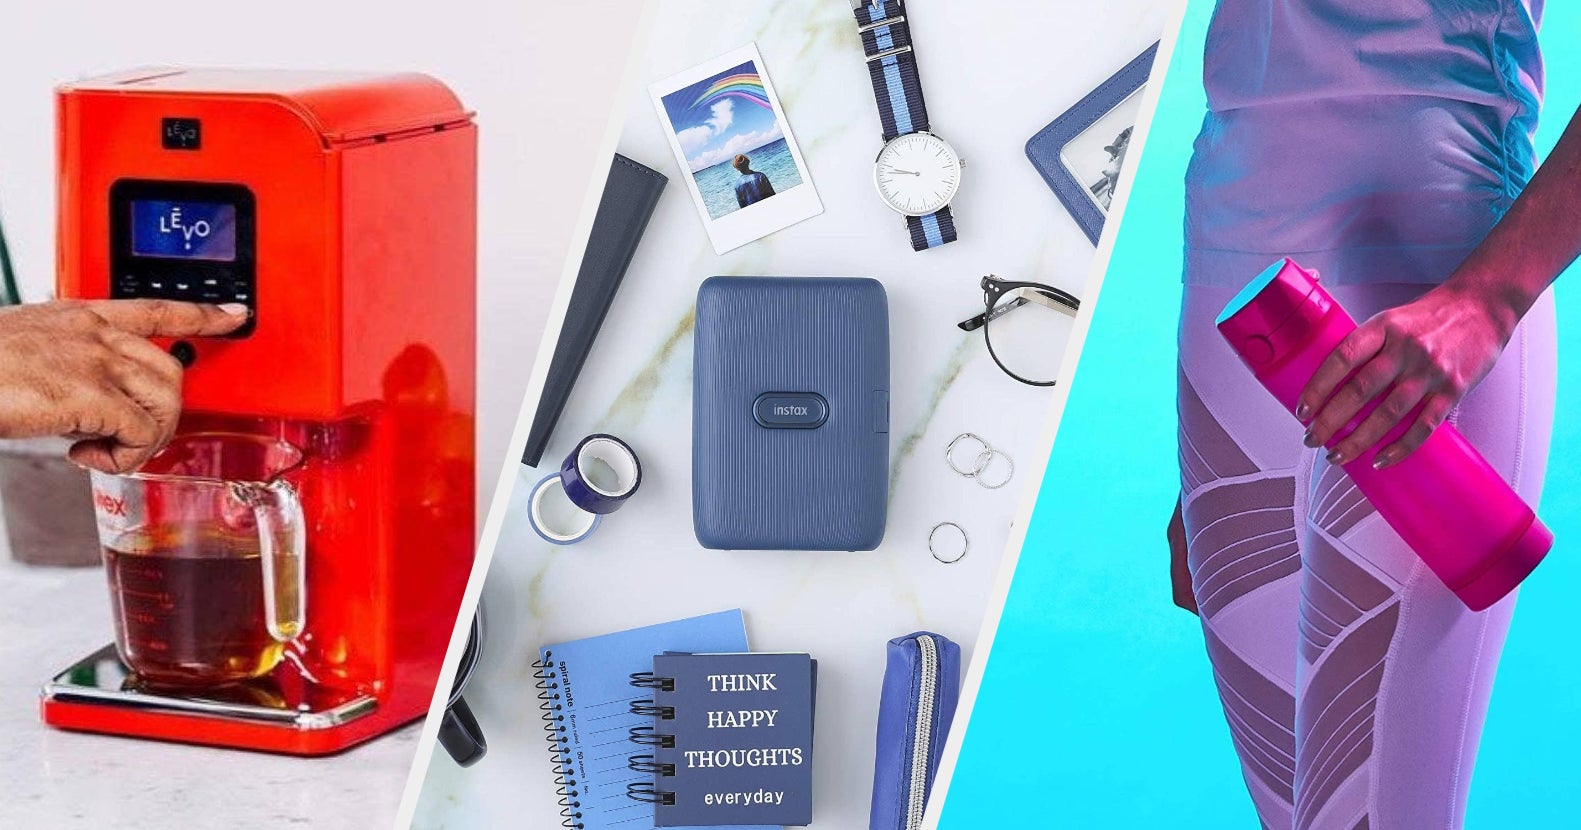 Mother's Day gadget gift guide 2022: tech gifts she'll love » Gadget Flow